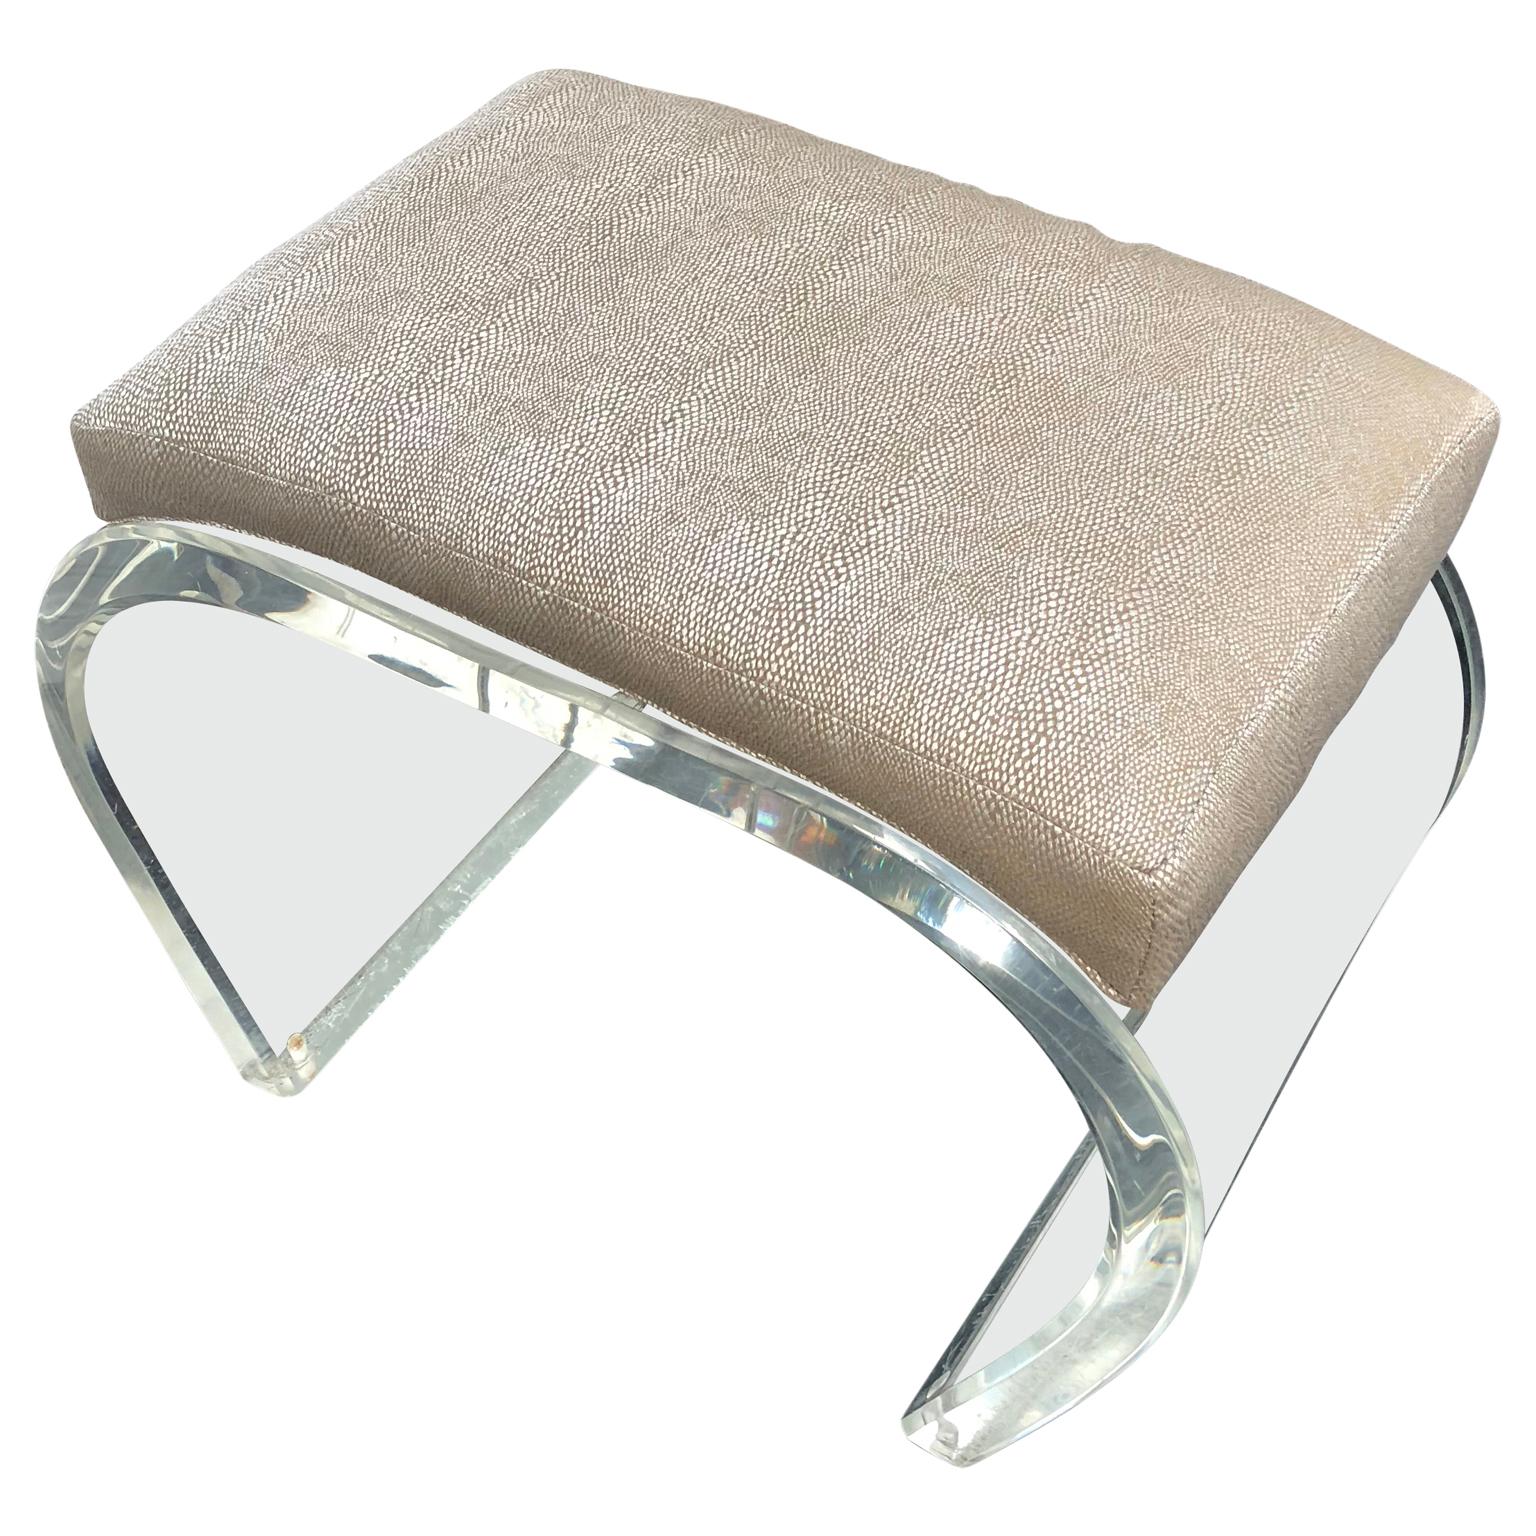 Thick Lucite mid-modern waterfall bench or ottoman